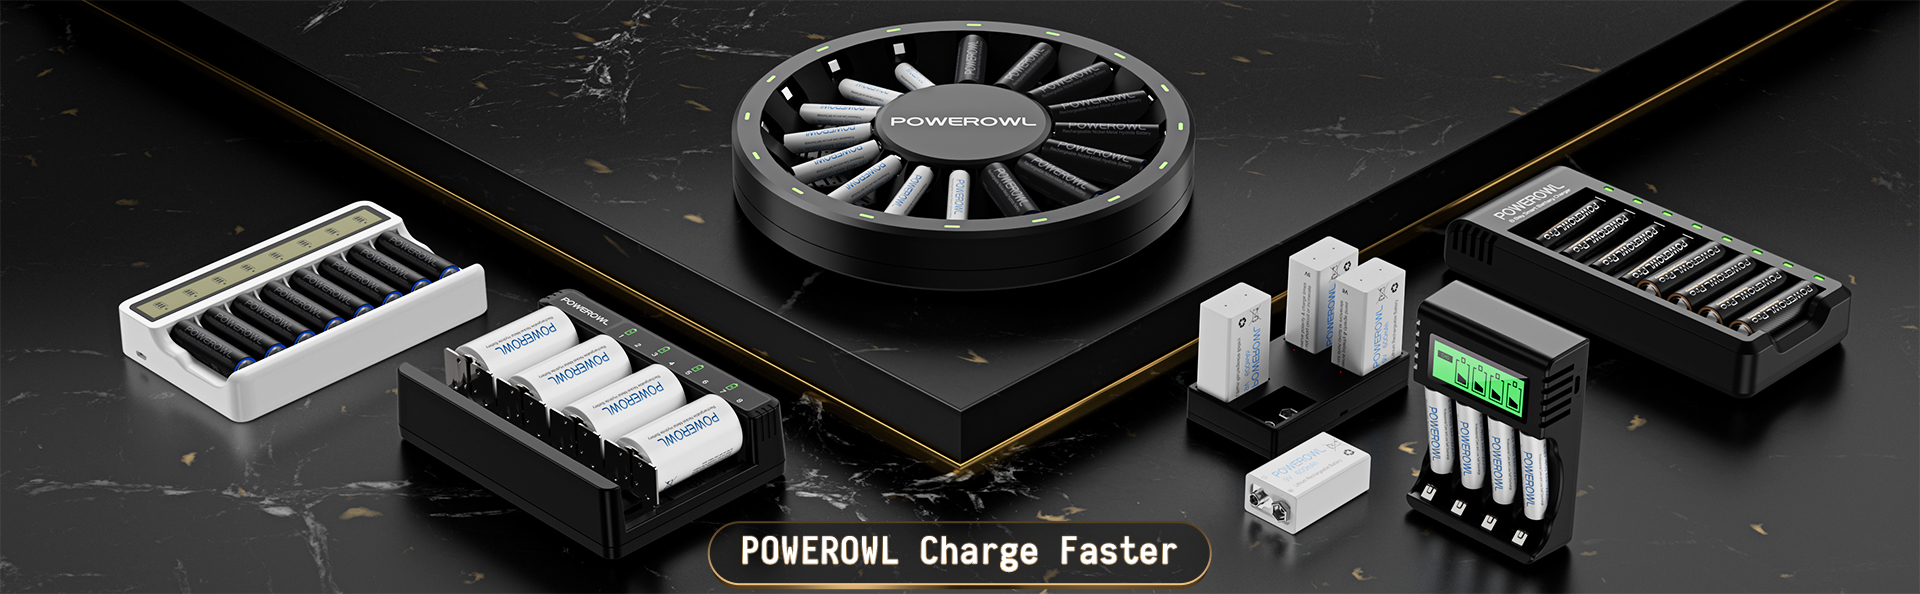 powerowl batteries charger